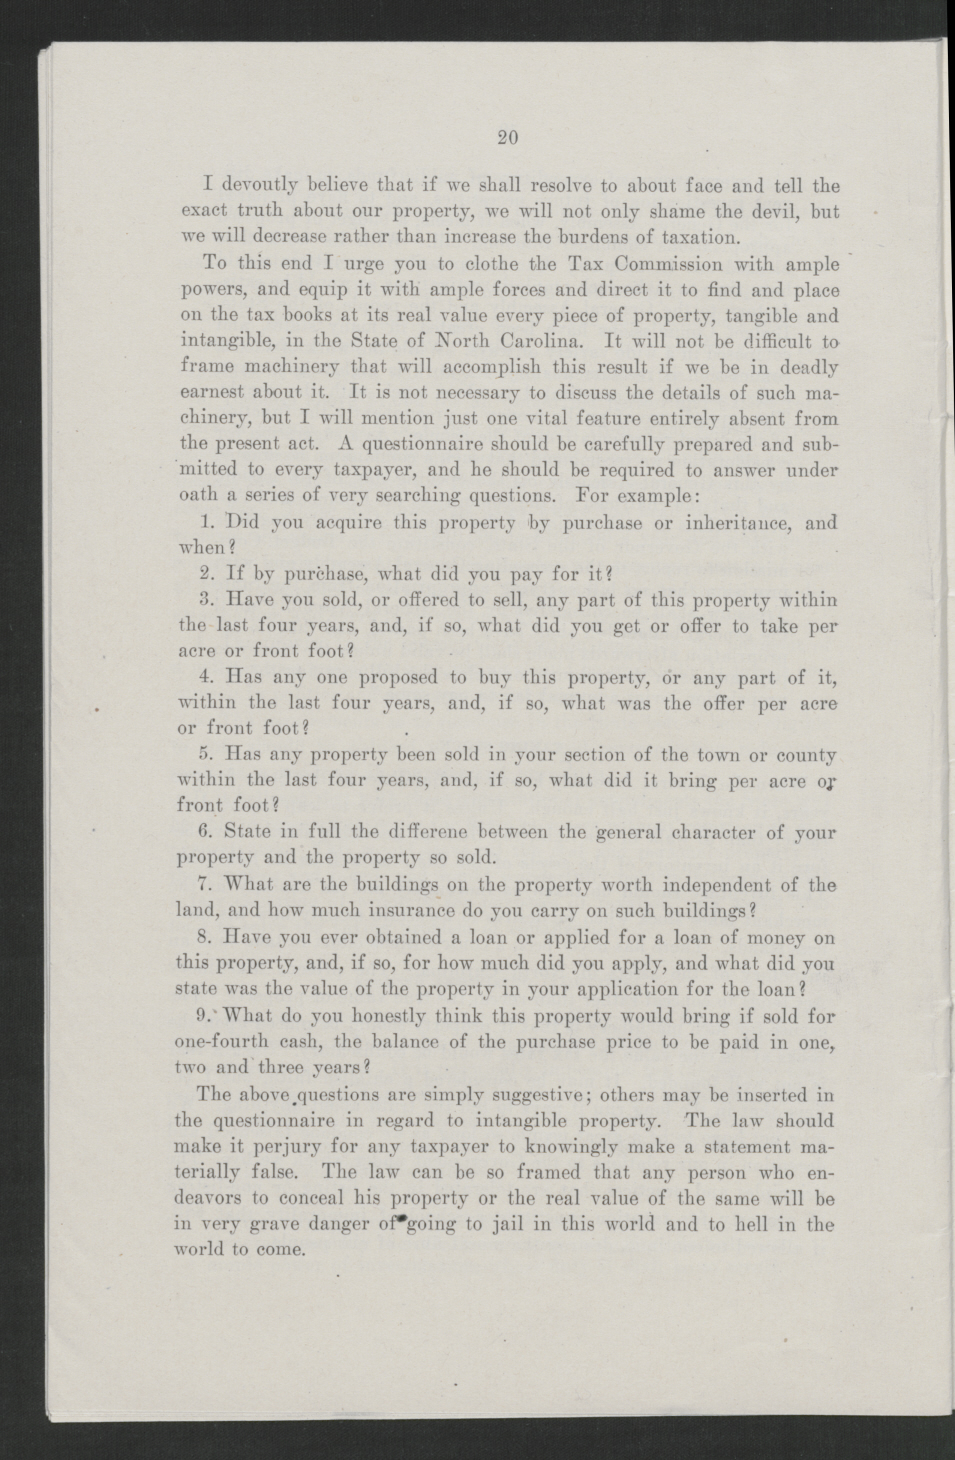 Biennial Message of Governor Thomas W. Bickett to the General Assembly, January 9, 1919, page 18